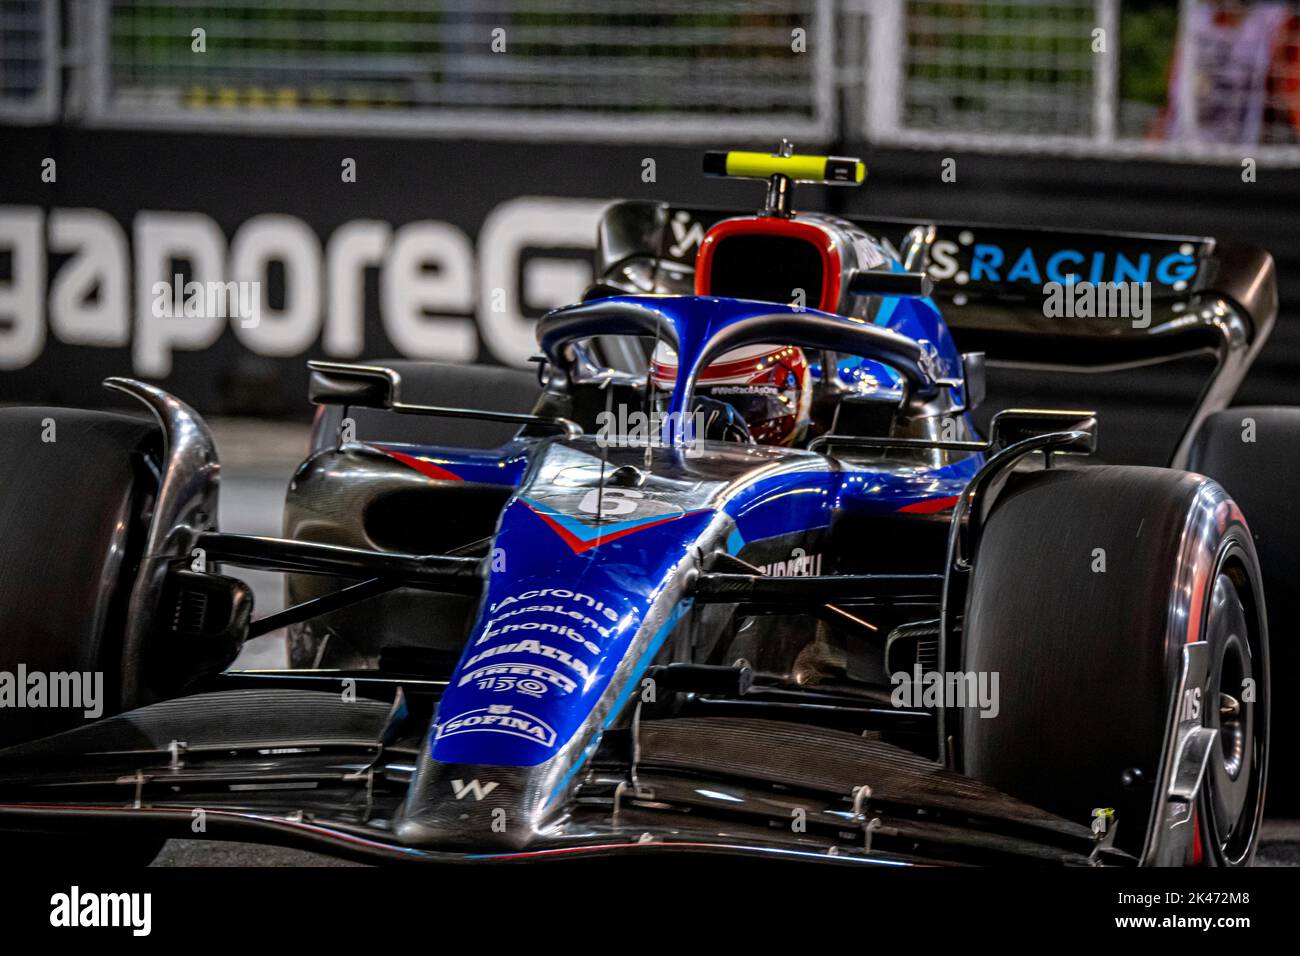 Marina Bay, Singapore, 30th Sep 2022, Nicholas Latifi, from Canada competes for Williams Racing. Practice, round 17 of the 2022 Formula 1 championship. Credit: Michael Potts/Alamy Live News Stock Photo